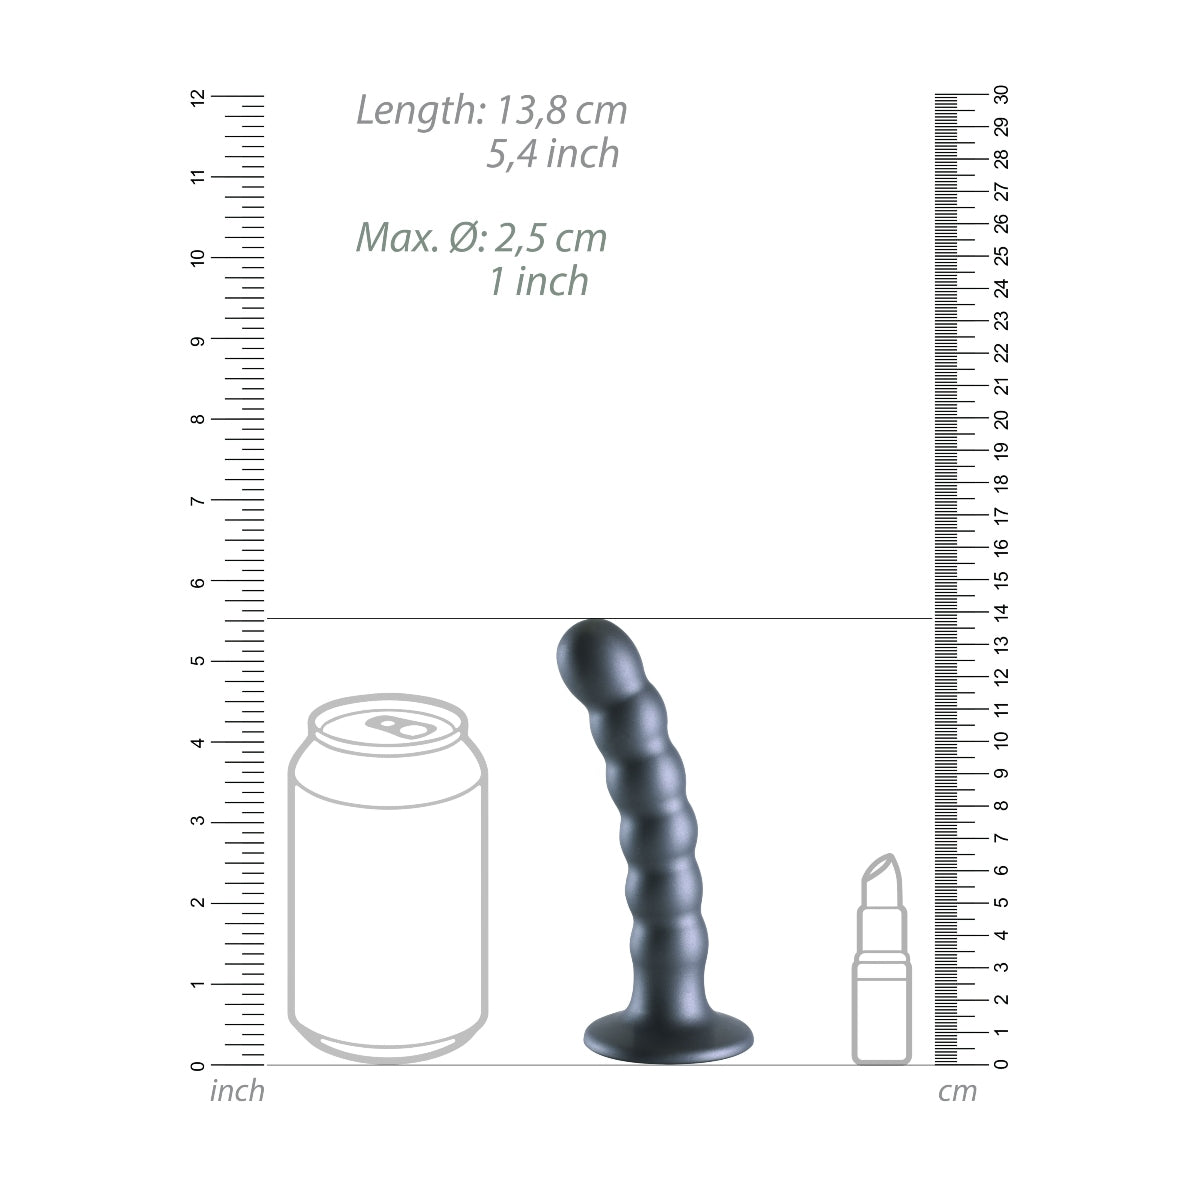 Ouch Beaded Silicone G Spot Dildo 5inch Metallic Grey, Scandals